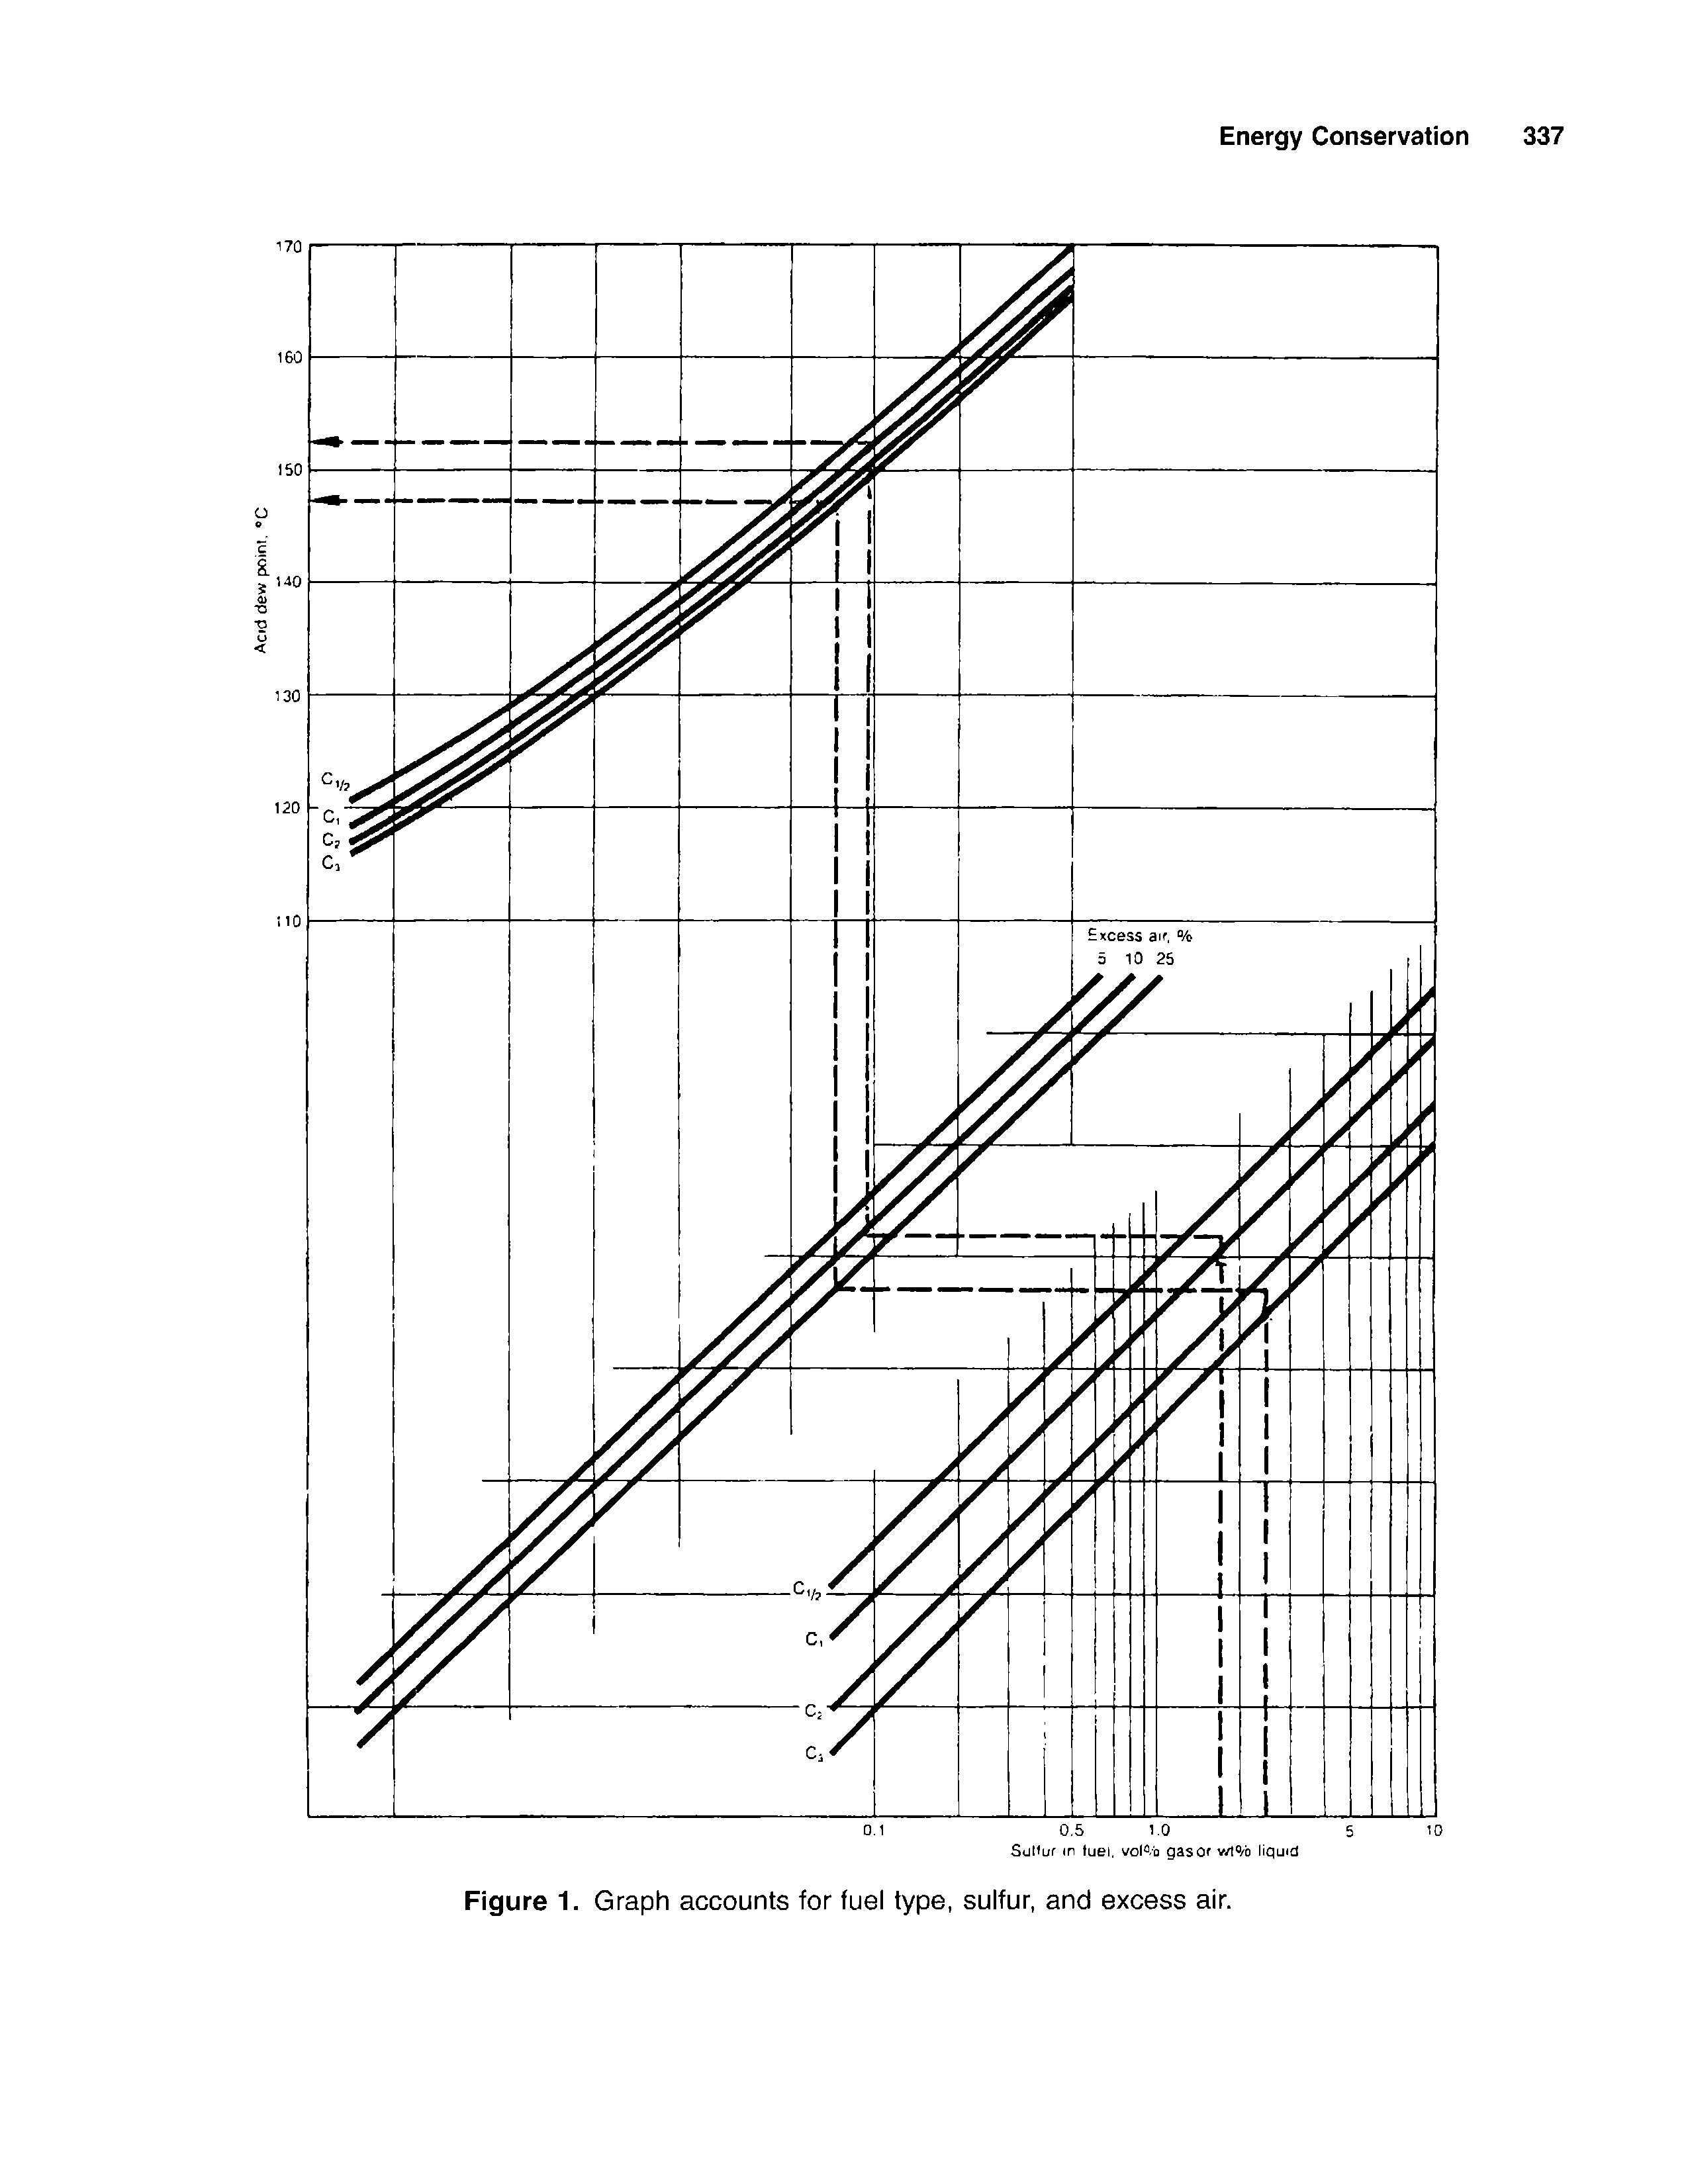 Figure 1. Graph accounts for fuel type, sulfur, and excess air.